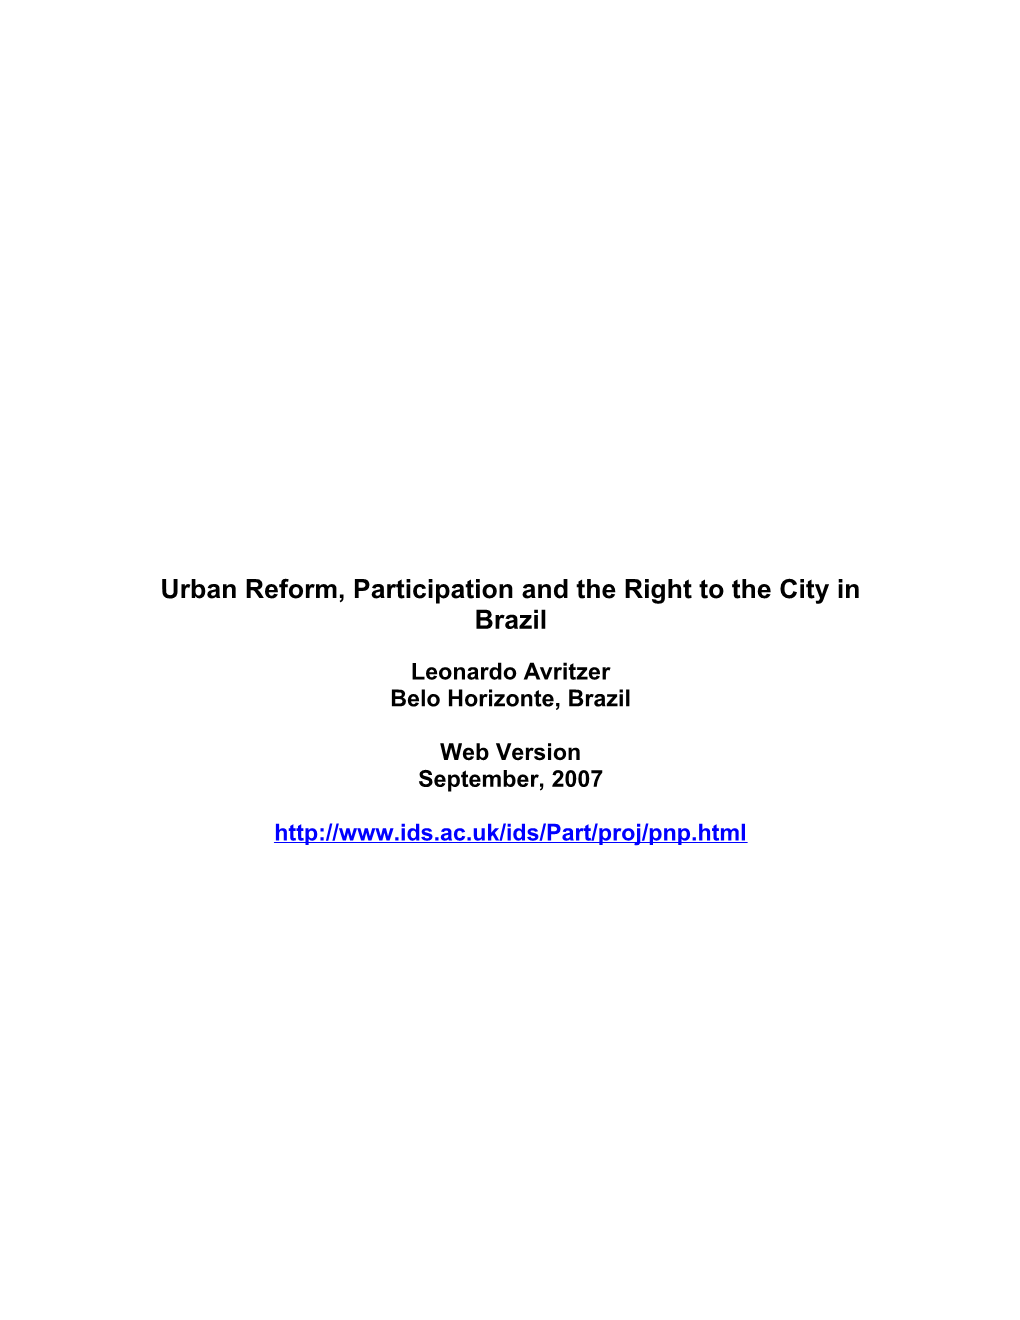 Statute of the City: Social Movements, Law and Urban Reform in Brazil